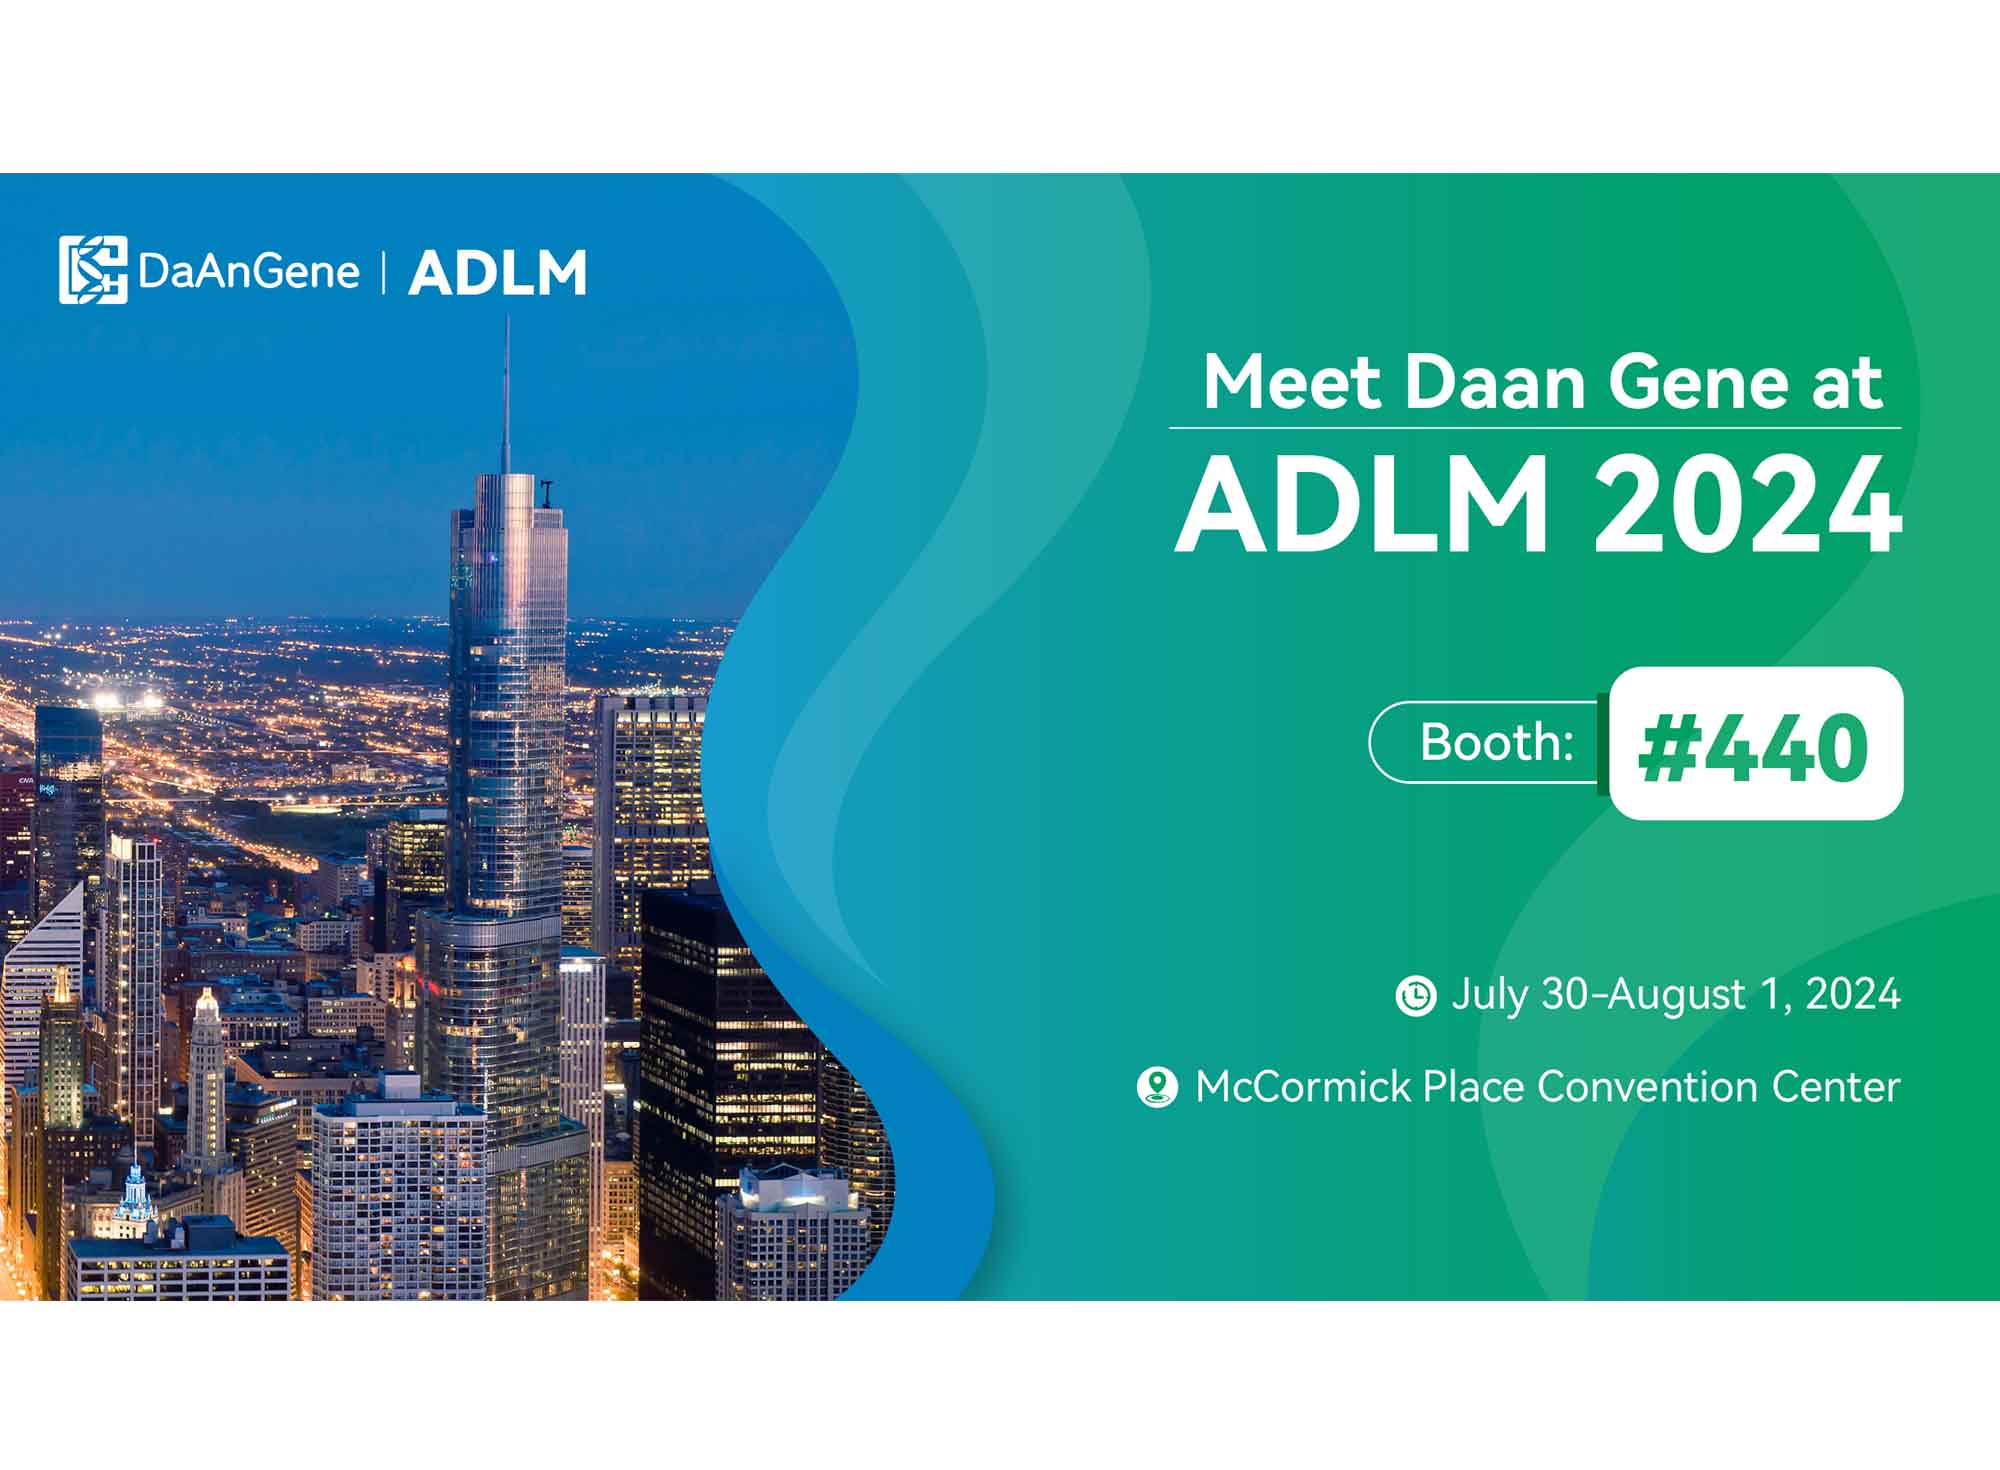 Join us at ADLM 2024!